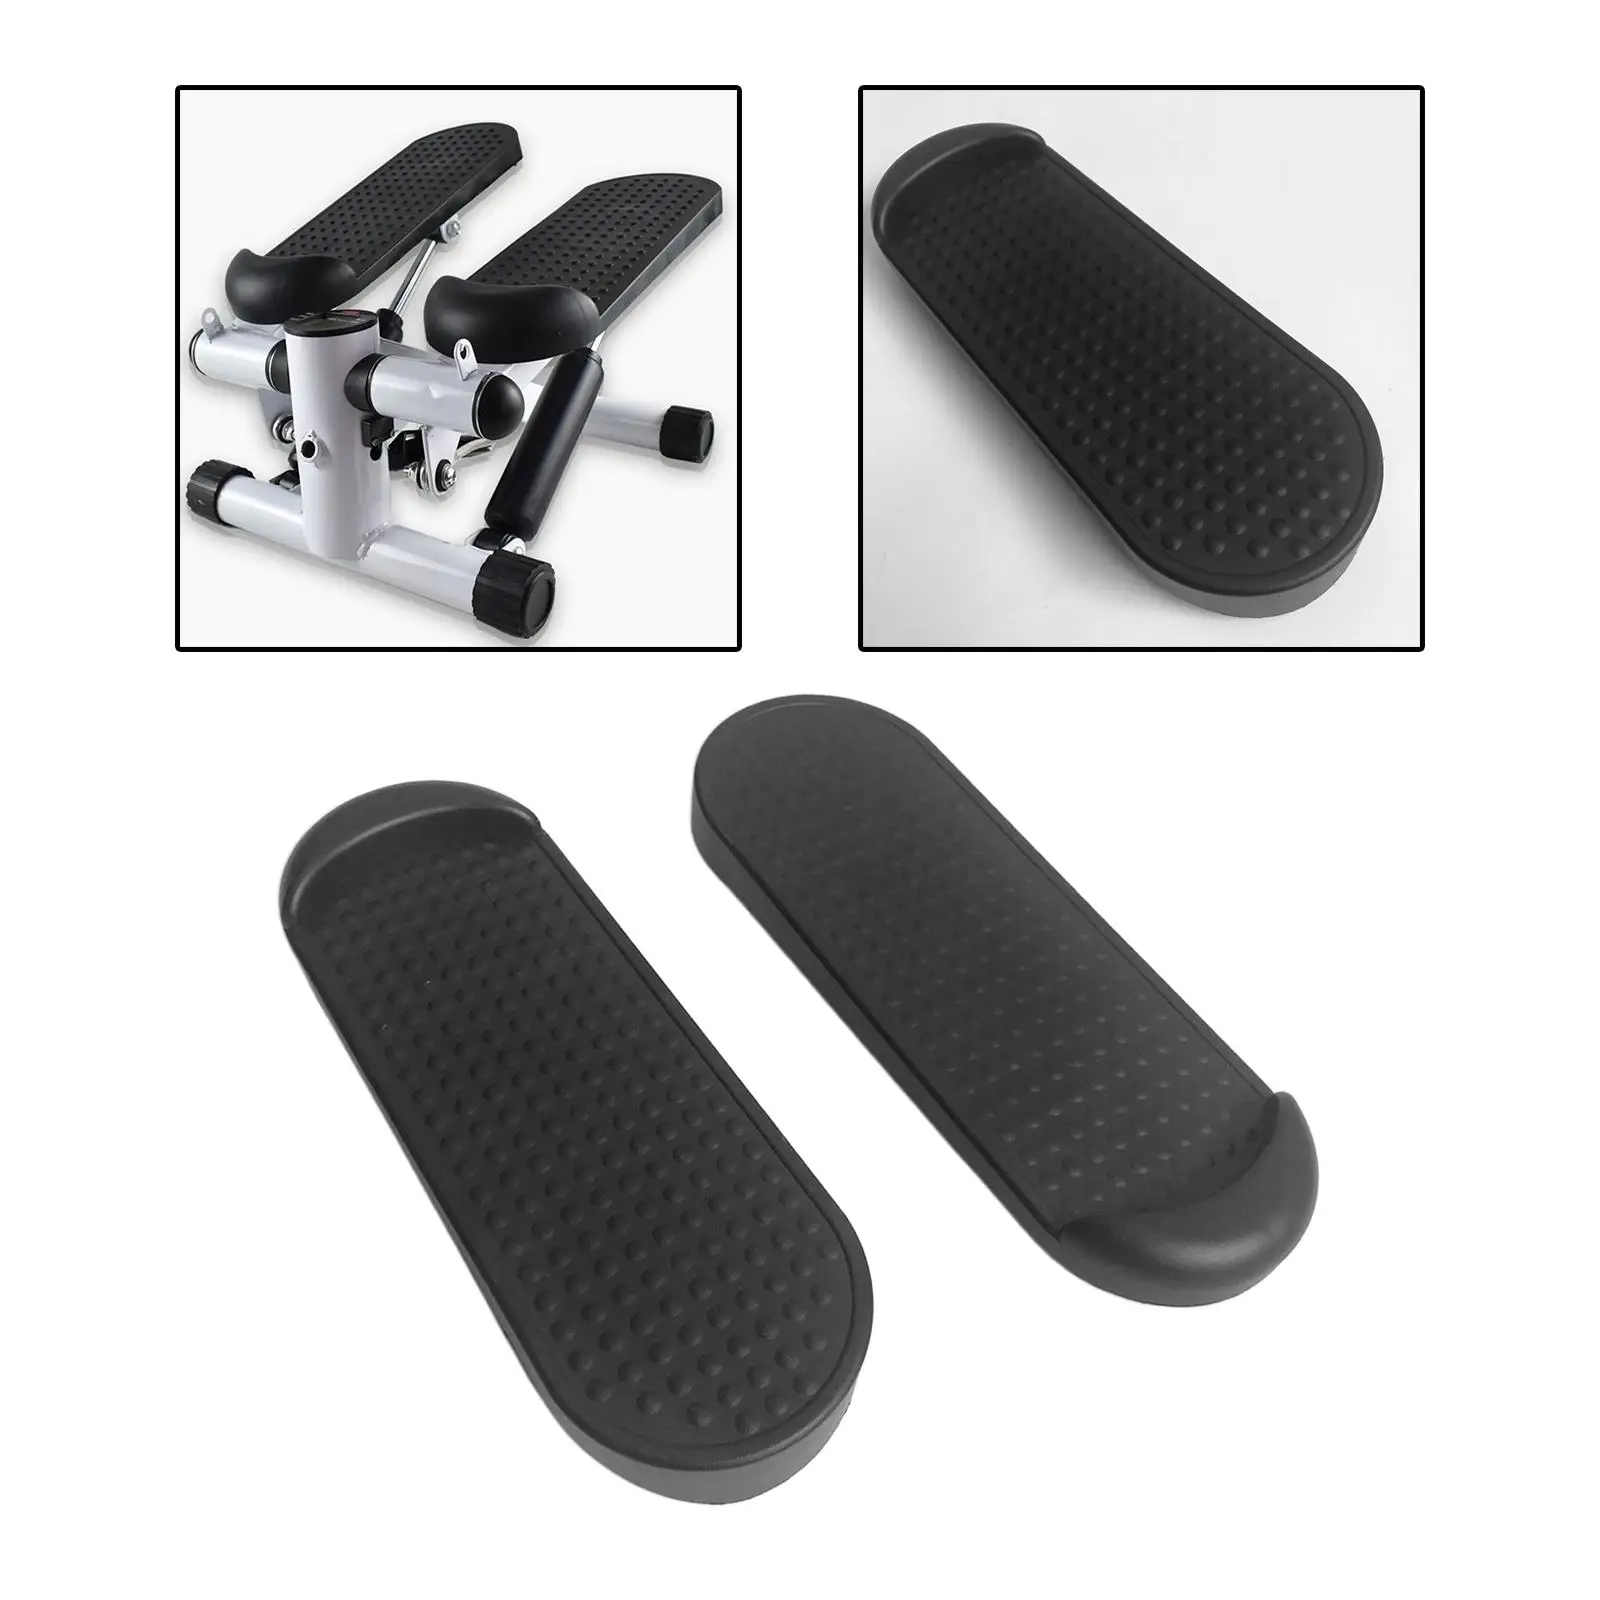 2x Stair Stepper Replacement Pedals Under Desk Elliptical Pedal Exerciser